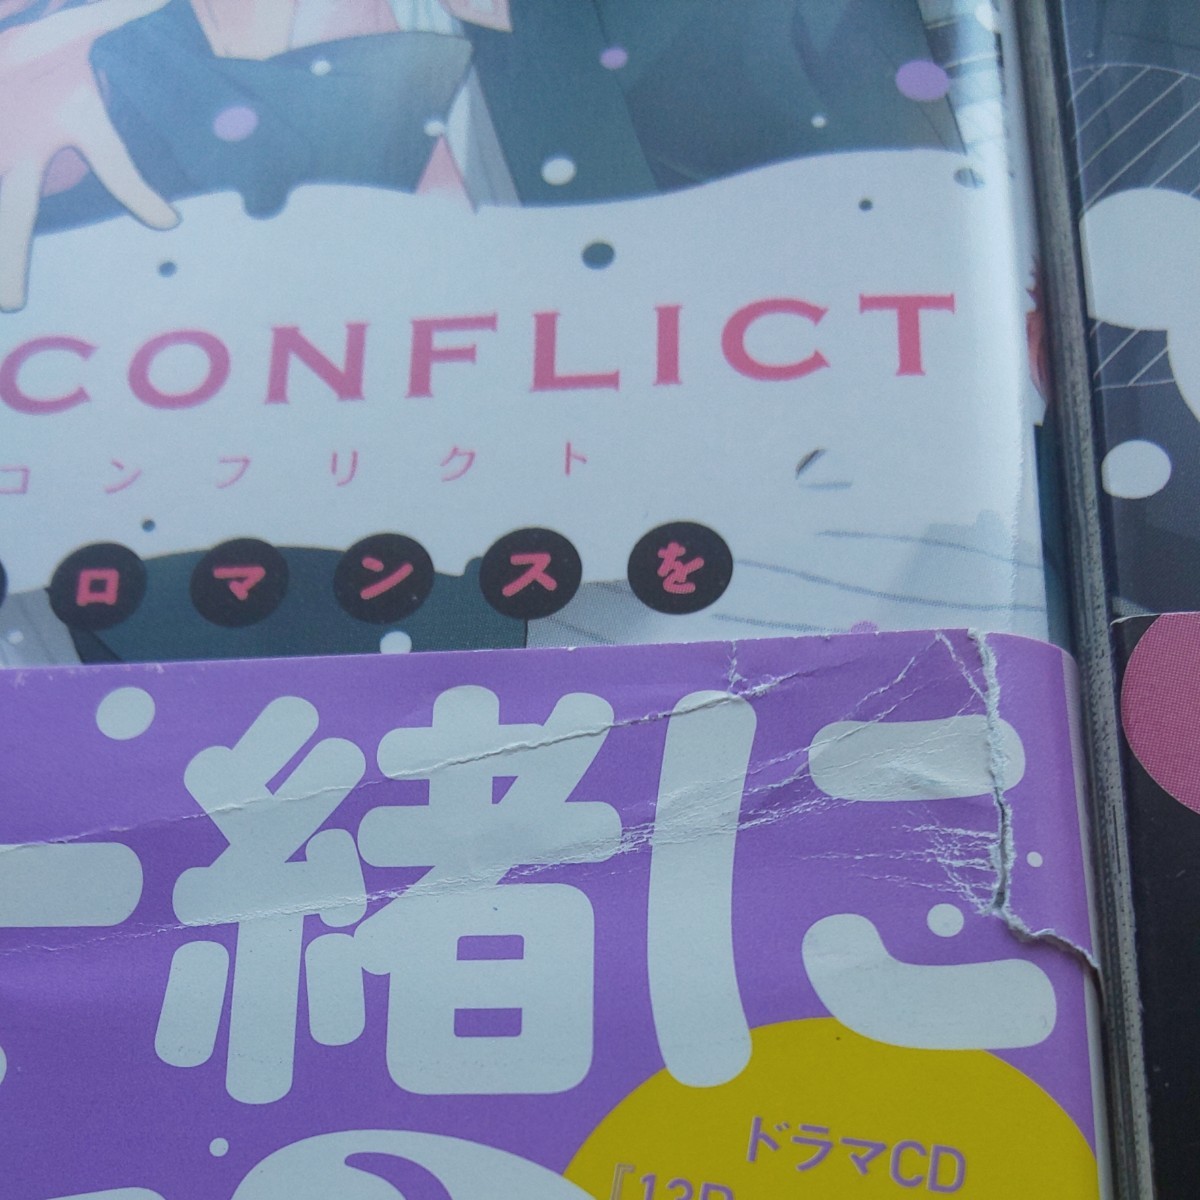 BROTHERS CONFLICT   全９冊  ウダジョ  水野隆志  SYLPH COMICS  